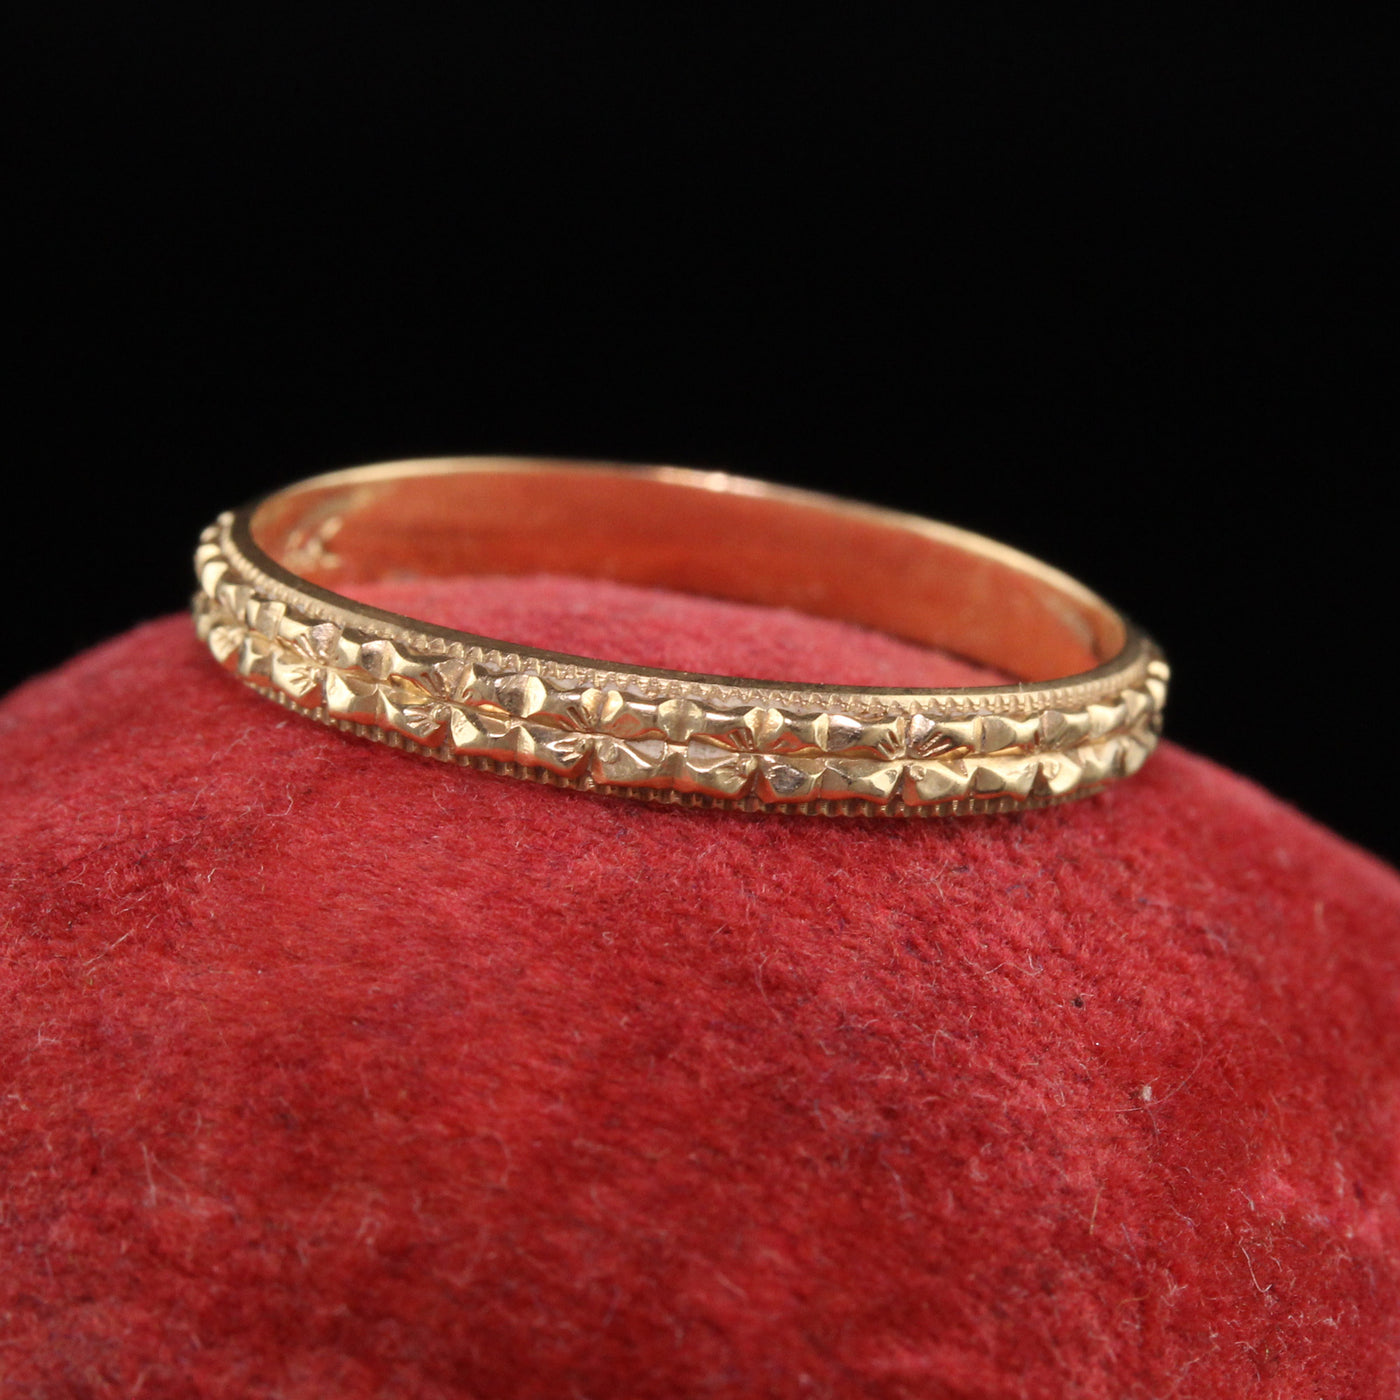 Antique Art Deco 14K Yellow Gold Engraved Wedding Band - Size 6 3/4